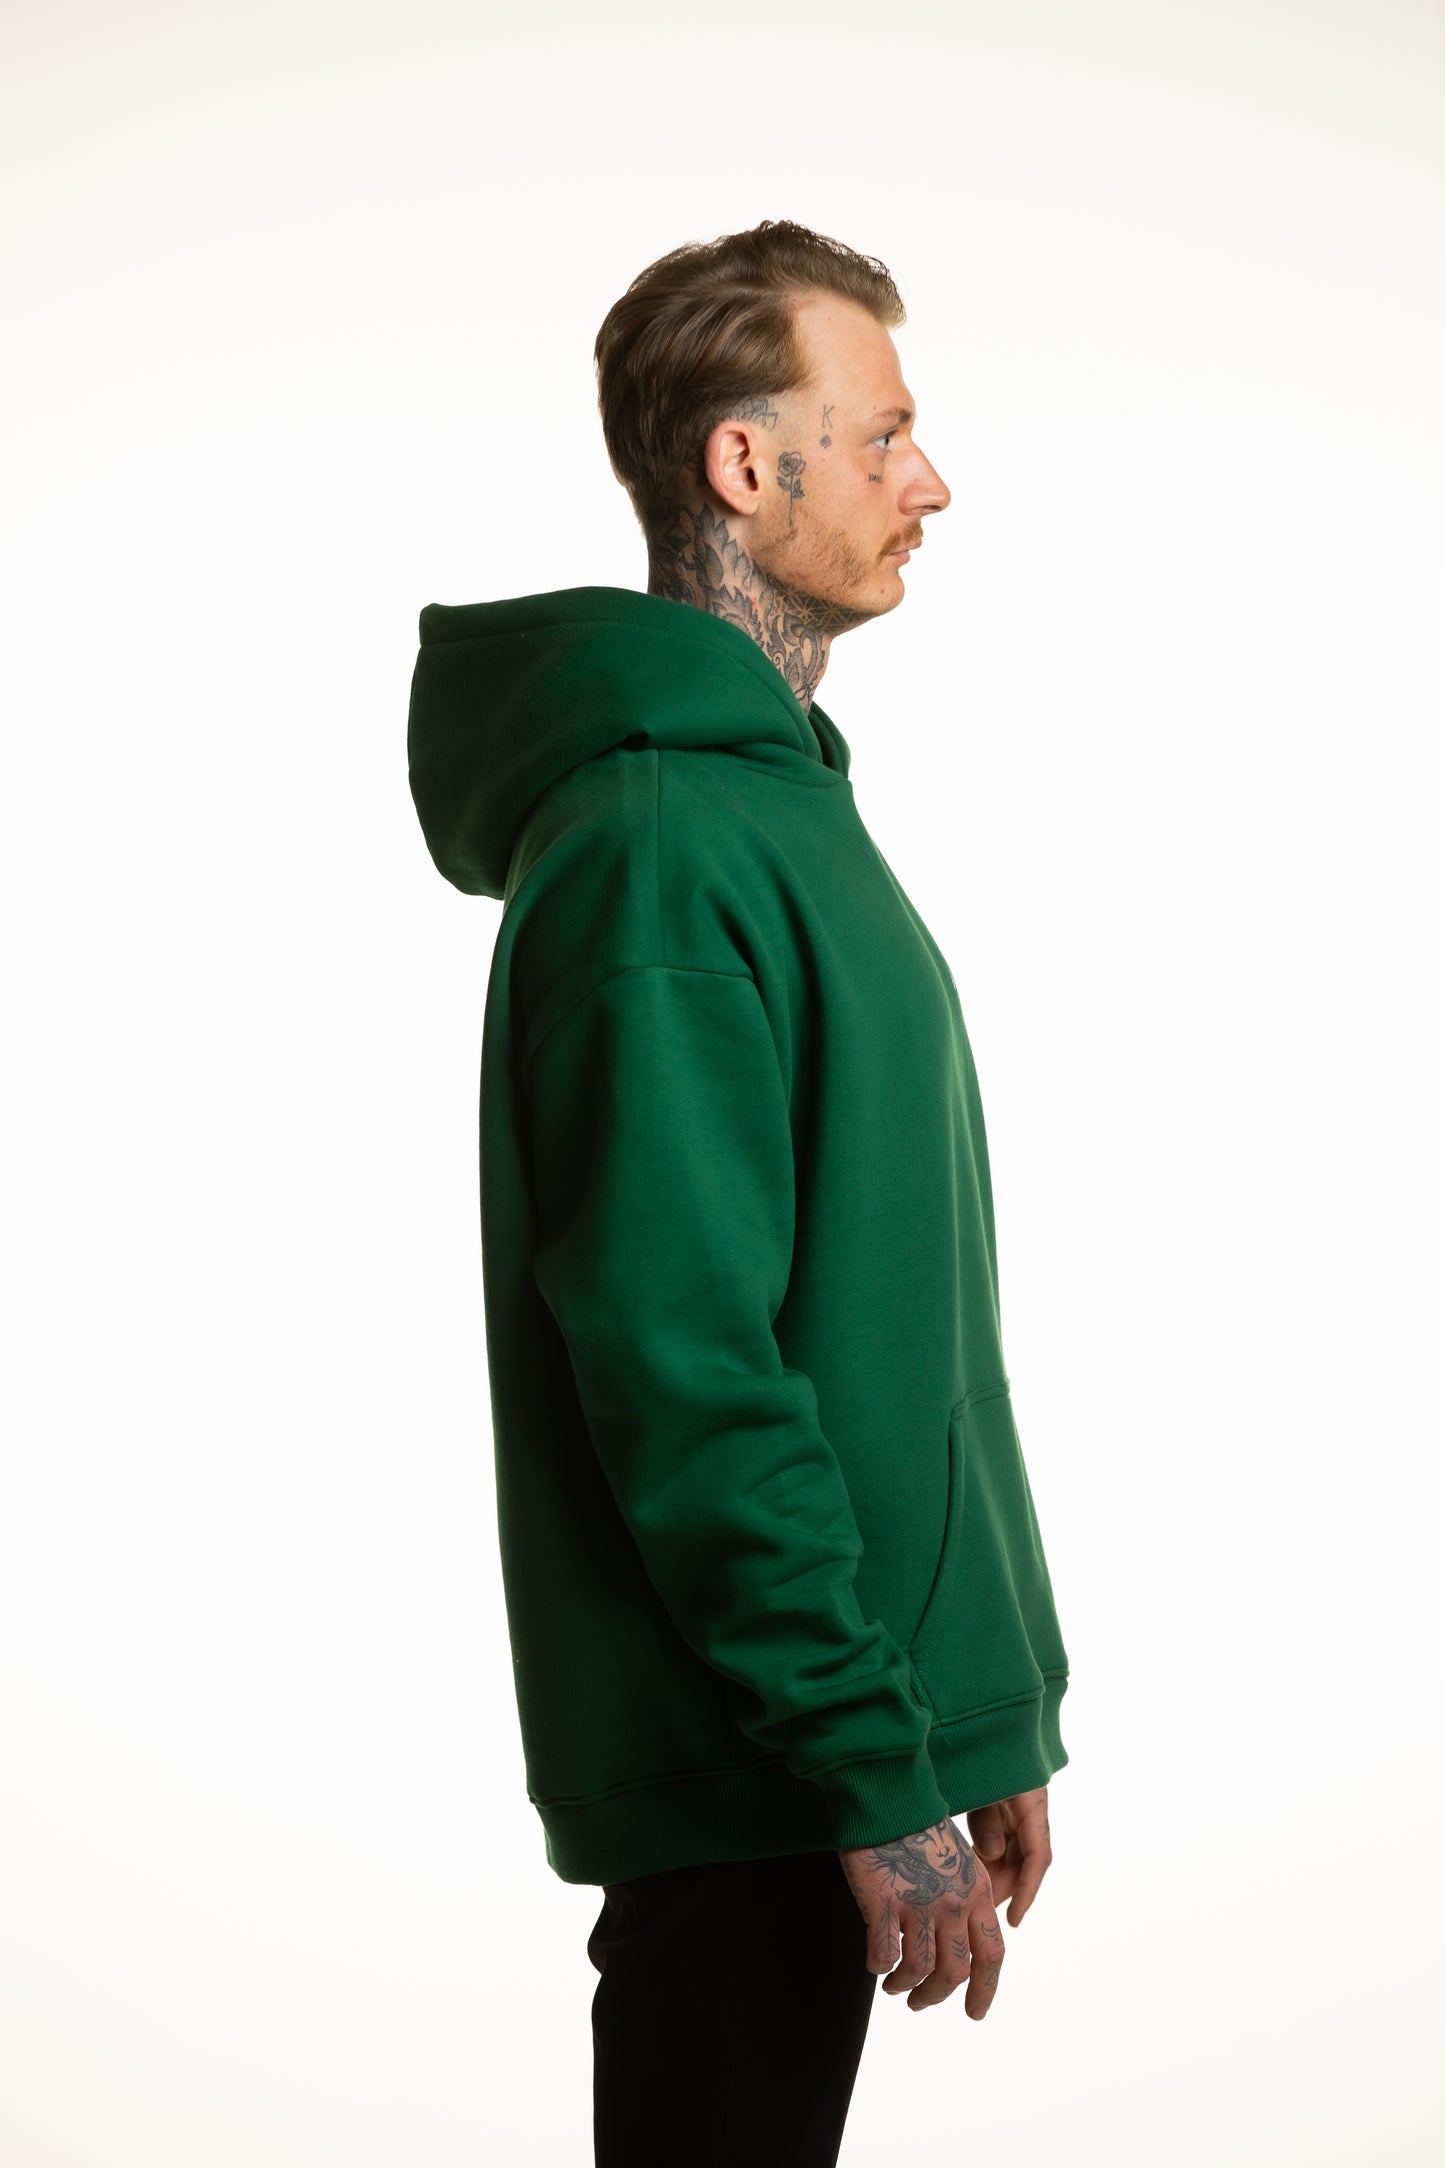 YOUNG SPIRIT OVERSIZED HOODIE GREEN